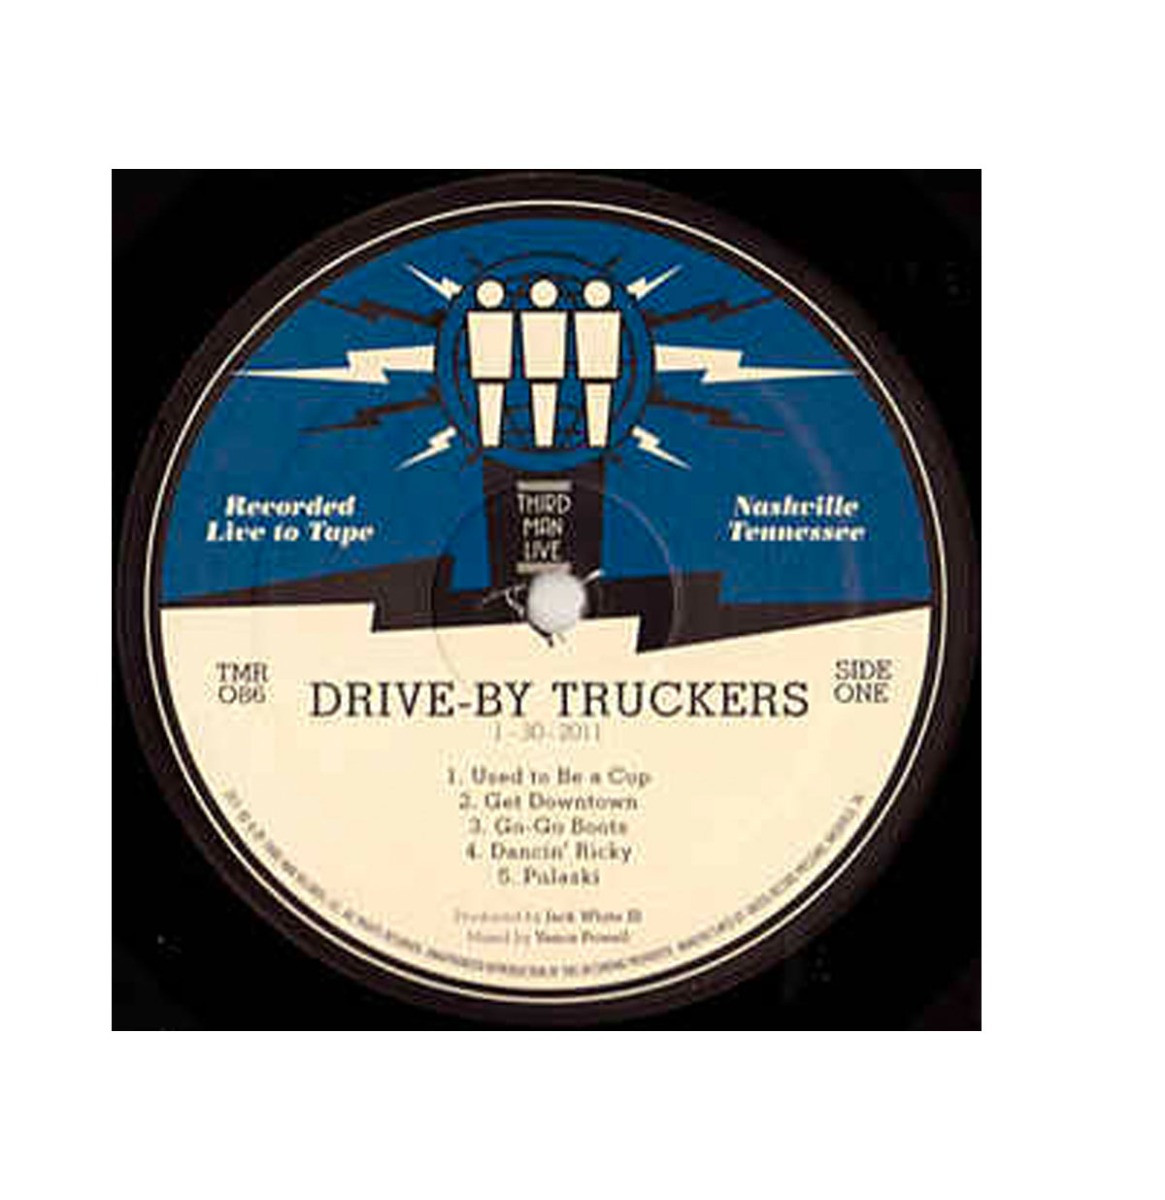 Drive-By Truckers - Third Man Live LP